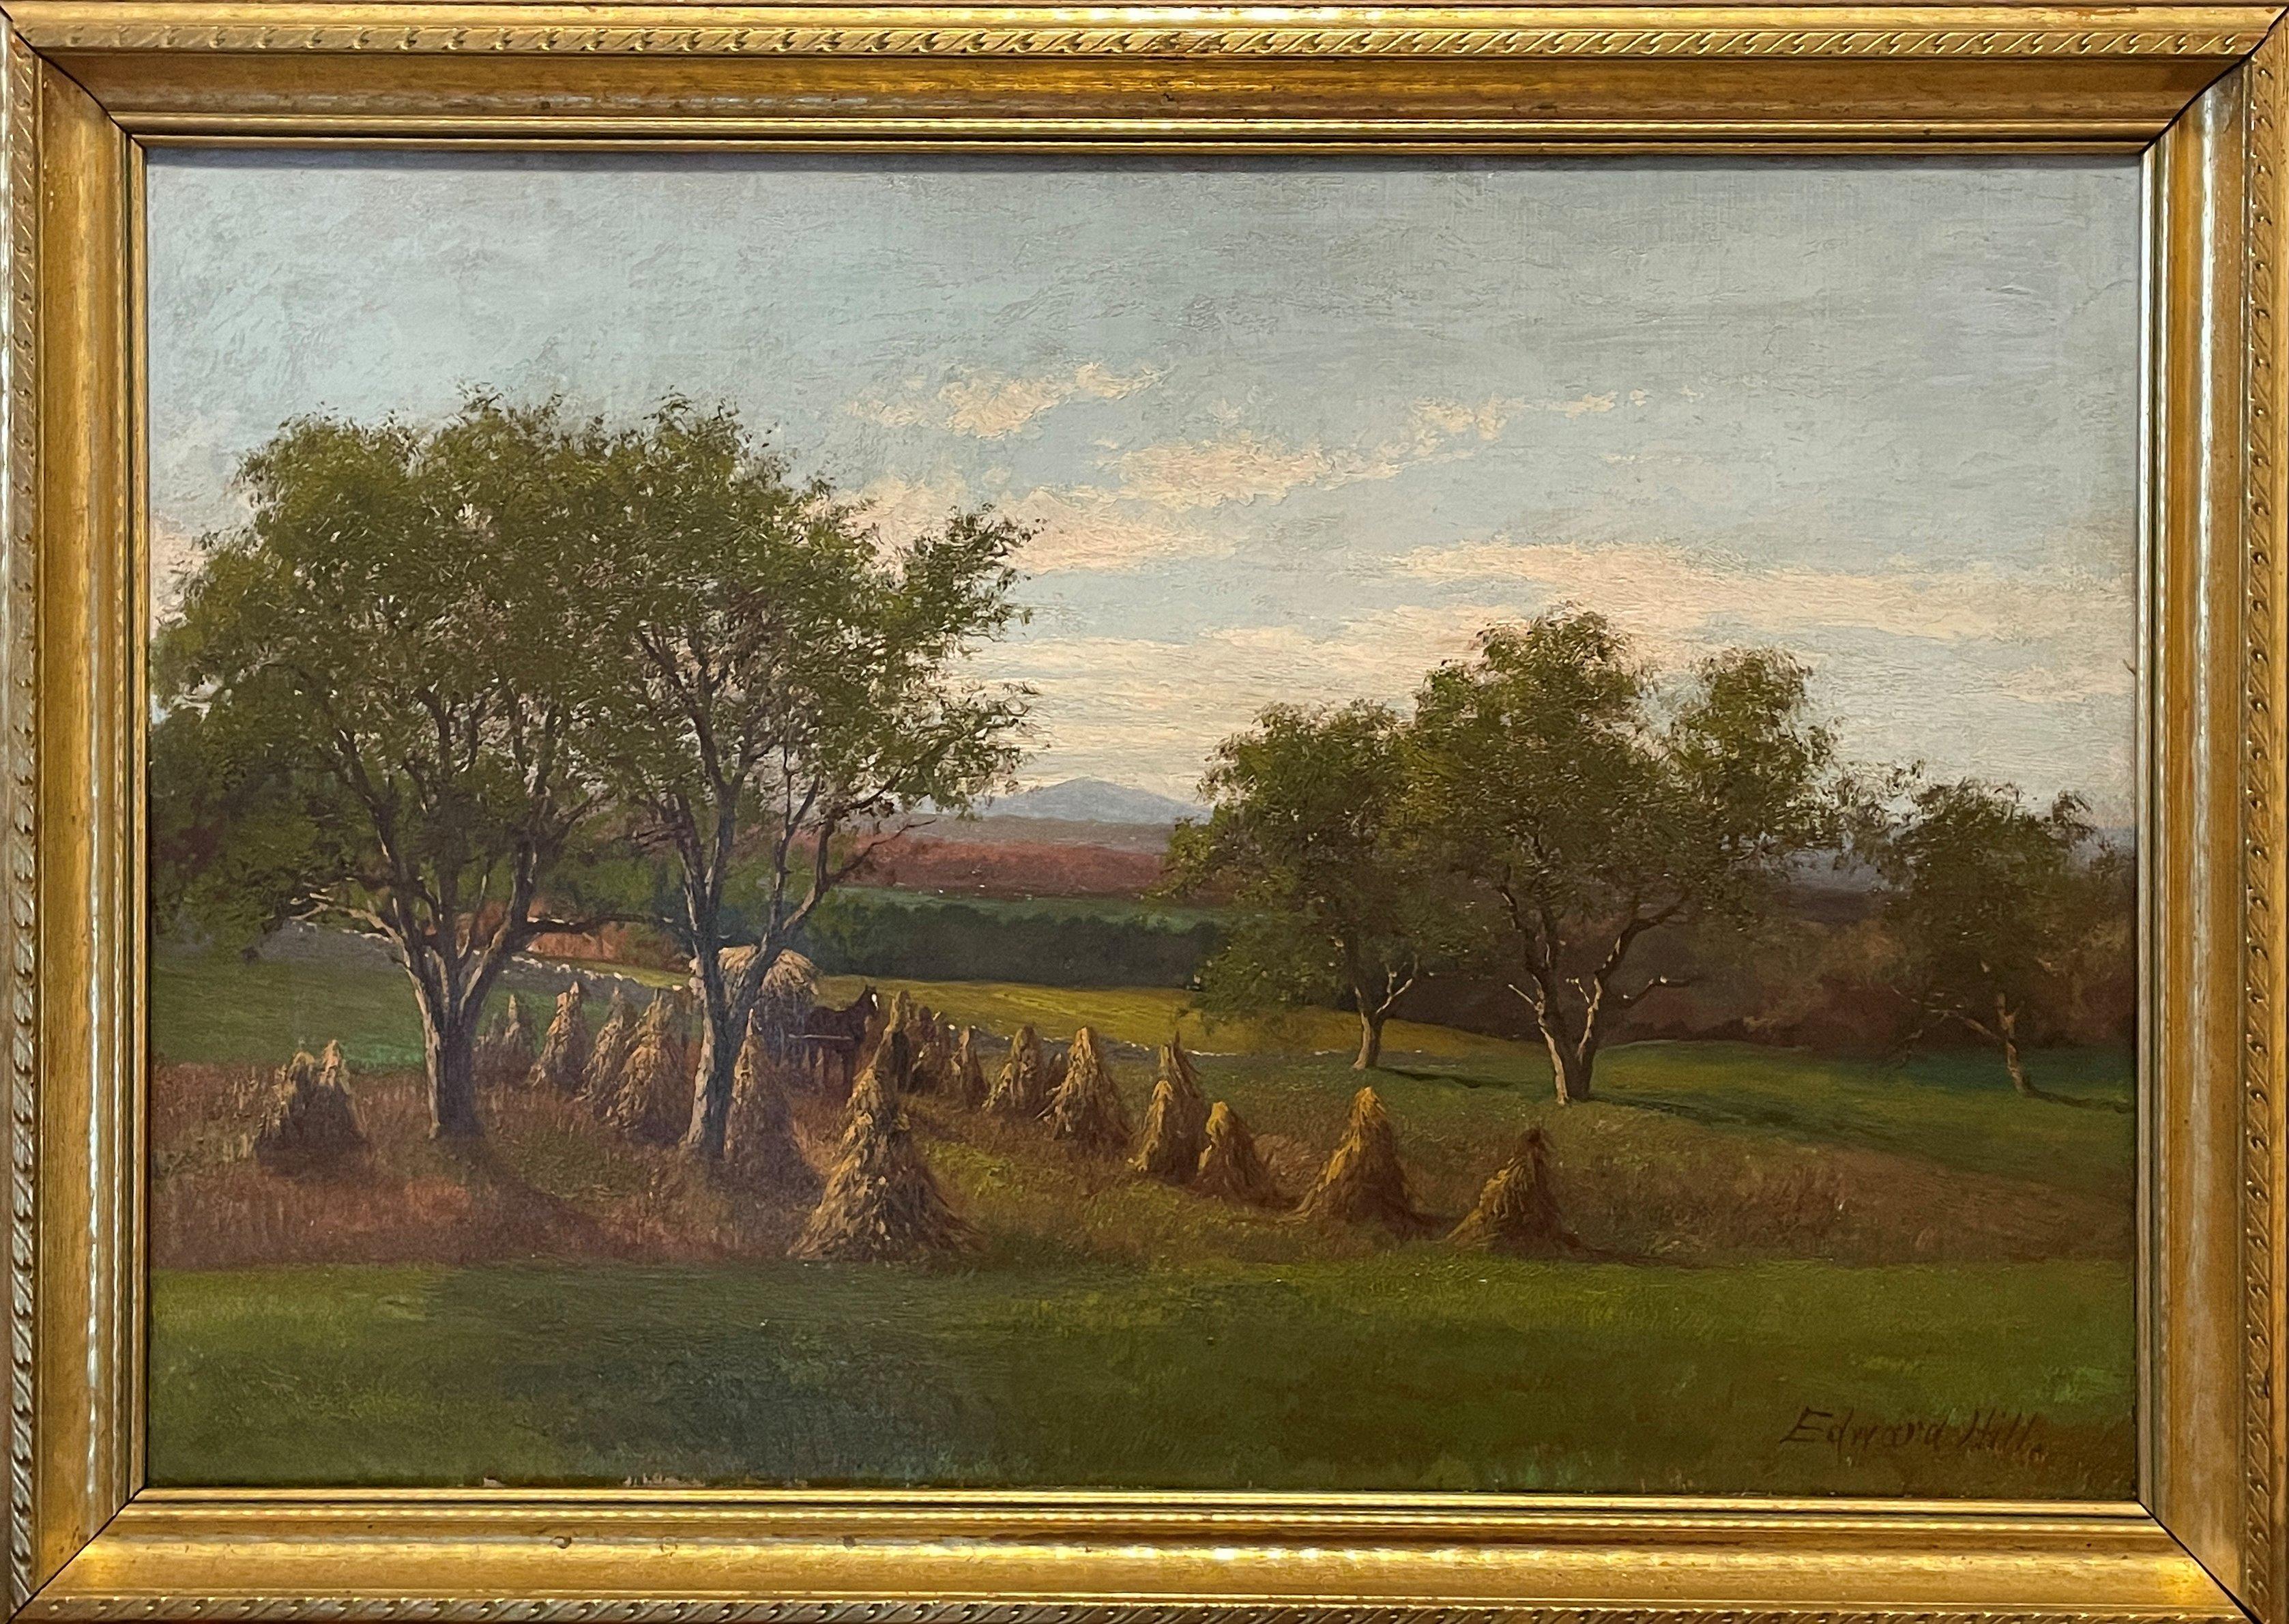 Edward Hill (1843 - 1923)
Haying at a North Conway Farm with Mount Washington in the Distance, New Hampshire
Oil on canvas
13 1/2 x 20 1/2 inches
Signed lower right

Provenance:
Private Collection, Dallas, Texas

Born in Wolverhampton, England in